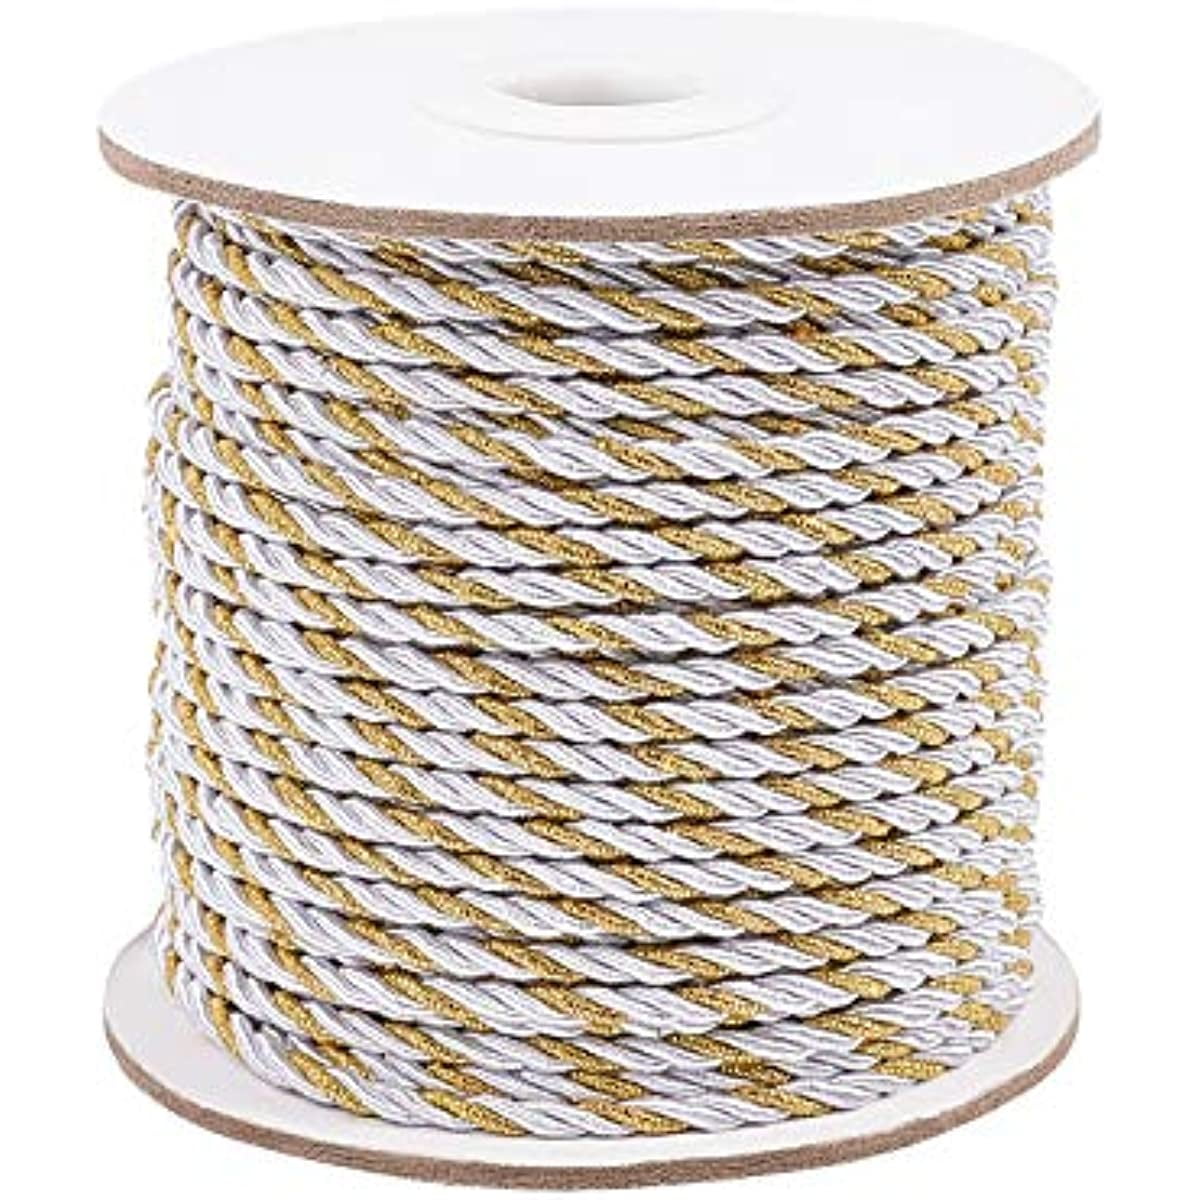 35 Colors 1mm Waxed Polyester Cord Bracelet Cord Wax Coated String for Bracelets Waxed Thread for Jewelry Making Waxed String for Bracelet Making10m